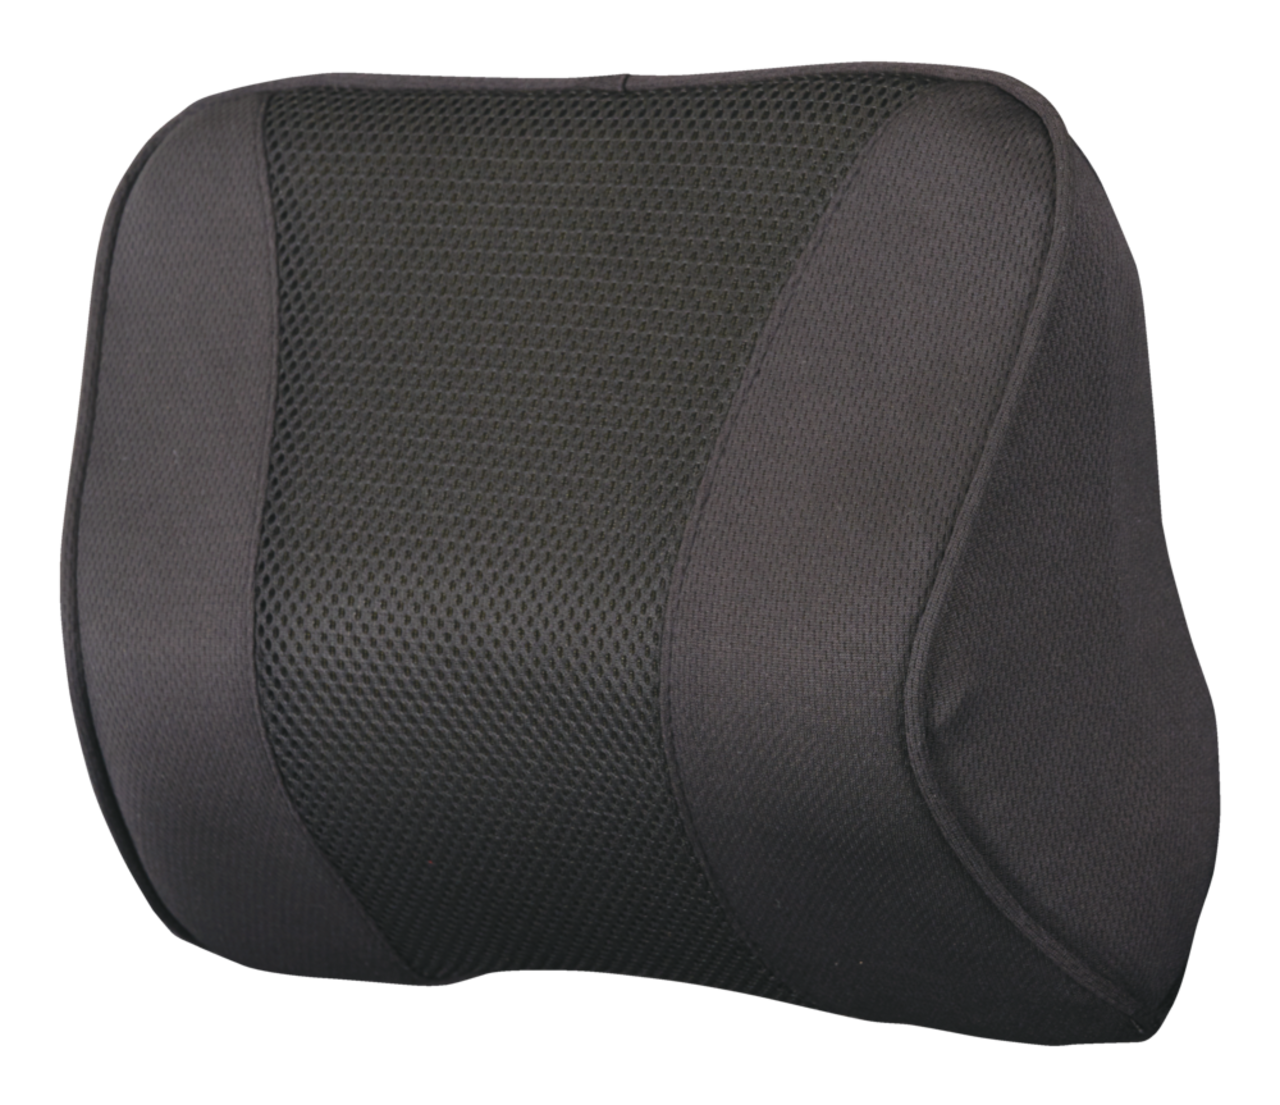 https://media-www.canadiantire.ca/product/automotive/car-care-accessories/auto-comfort/0323533/autotrends-memory-foam-neck-support-4e3268ad-867a-4446-9baf-83a24e4635a5.png?imdensity=1&imwidth=640&impolicy=mZoom